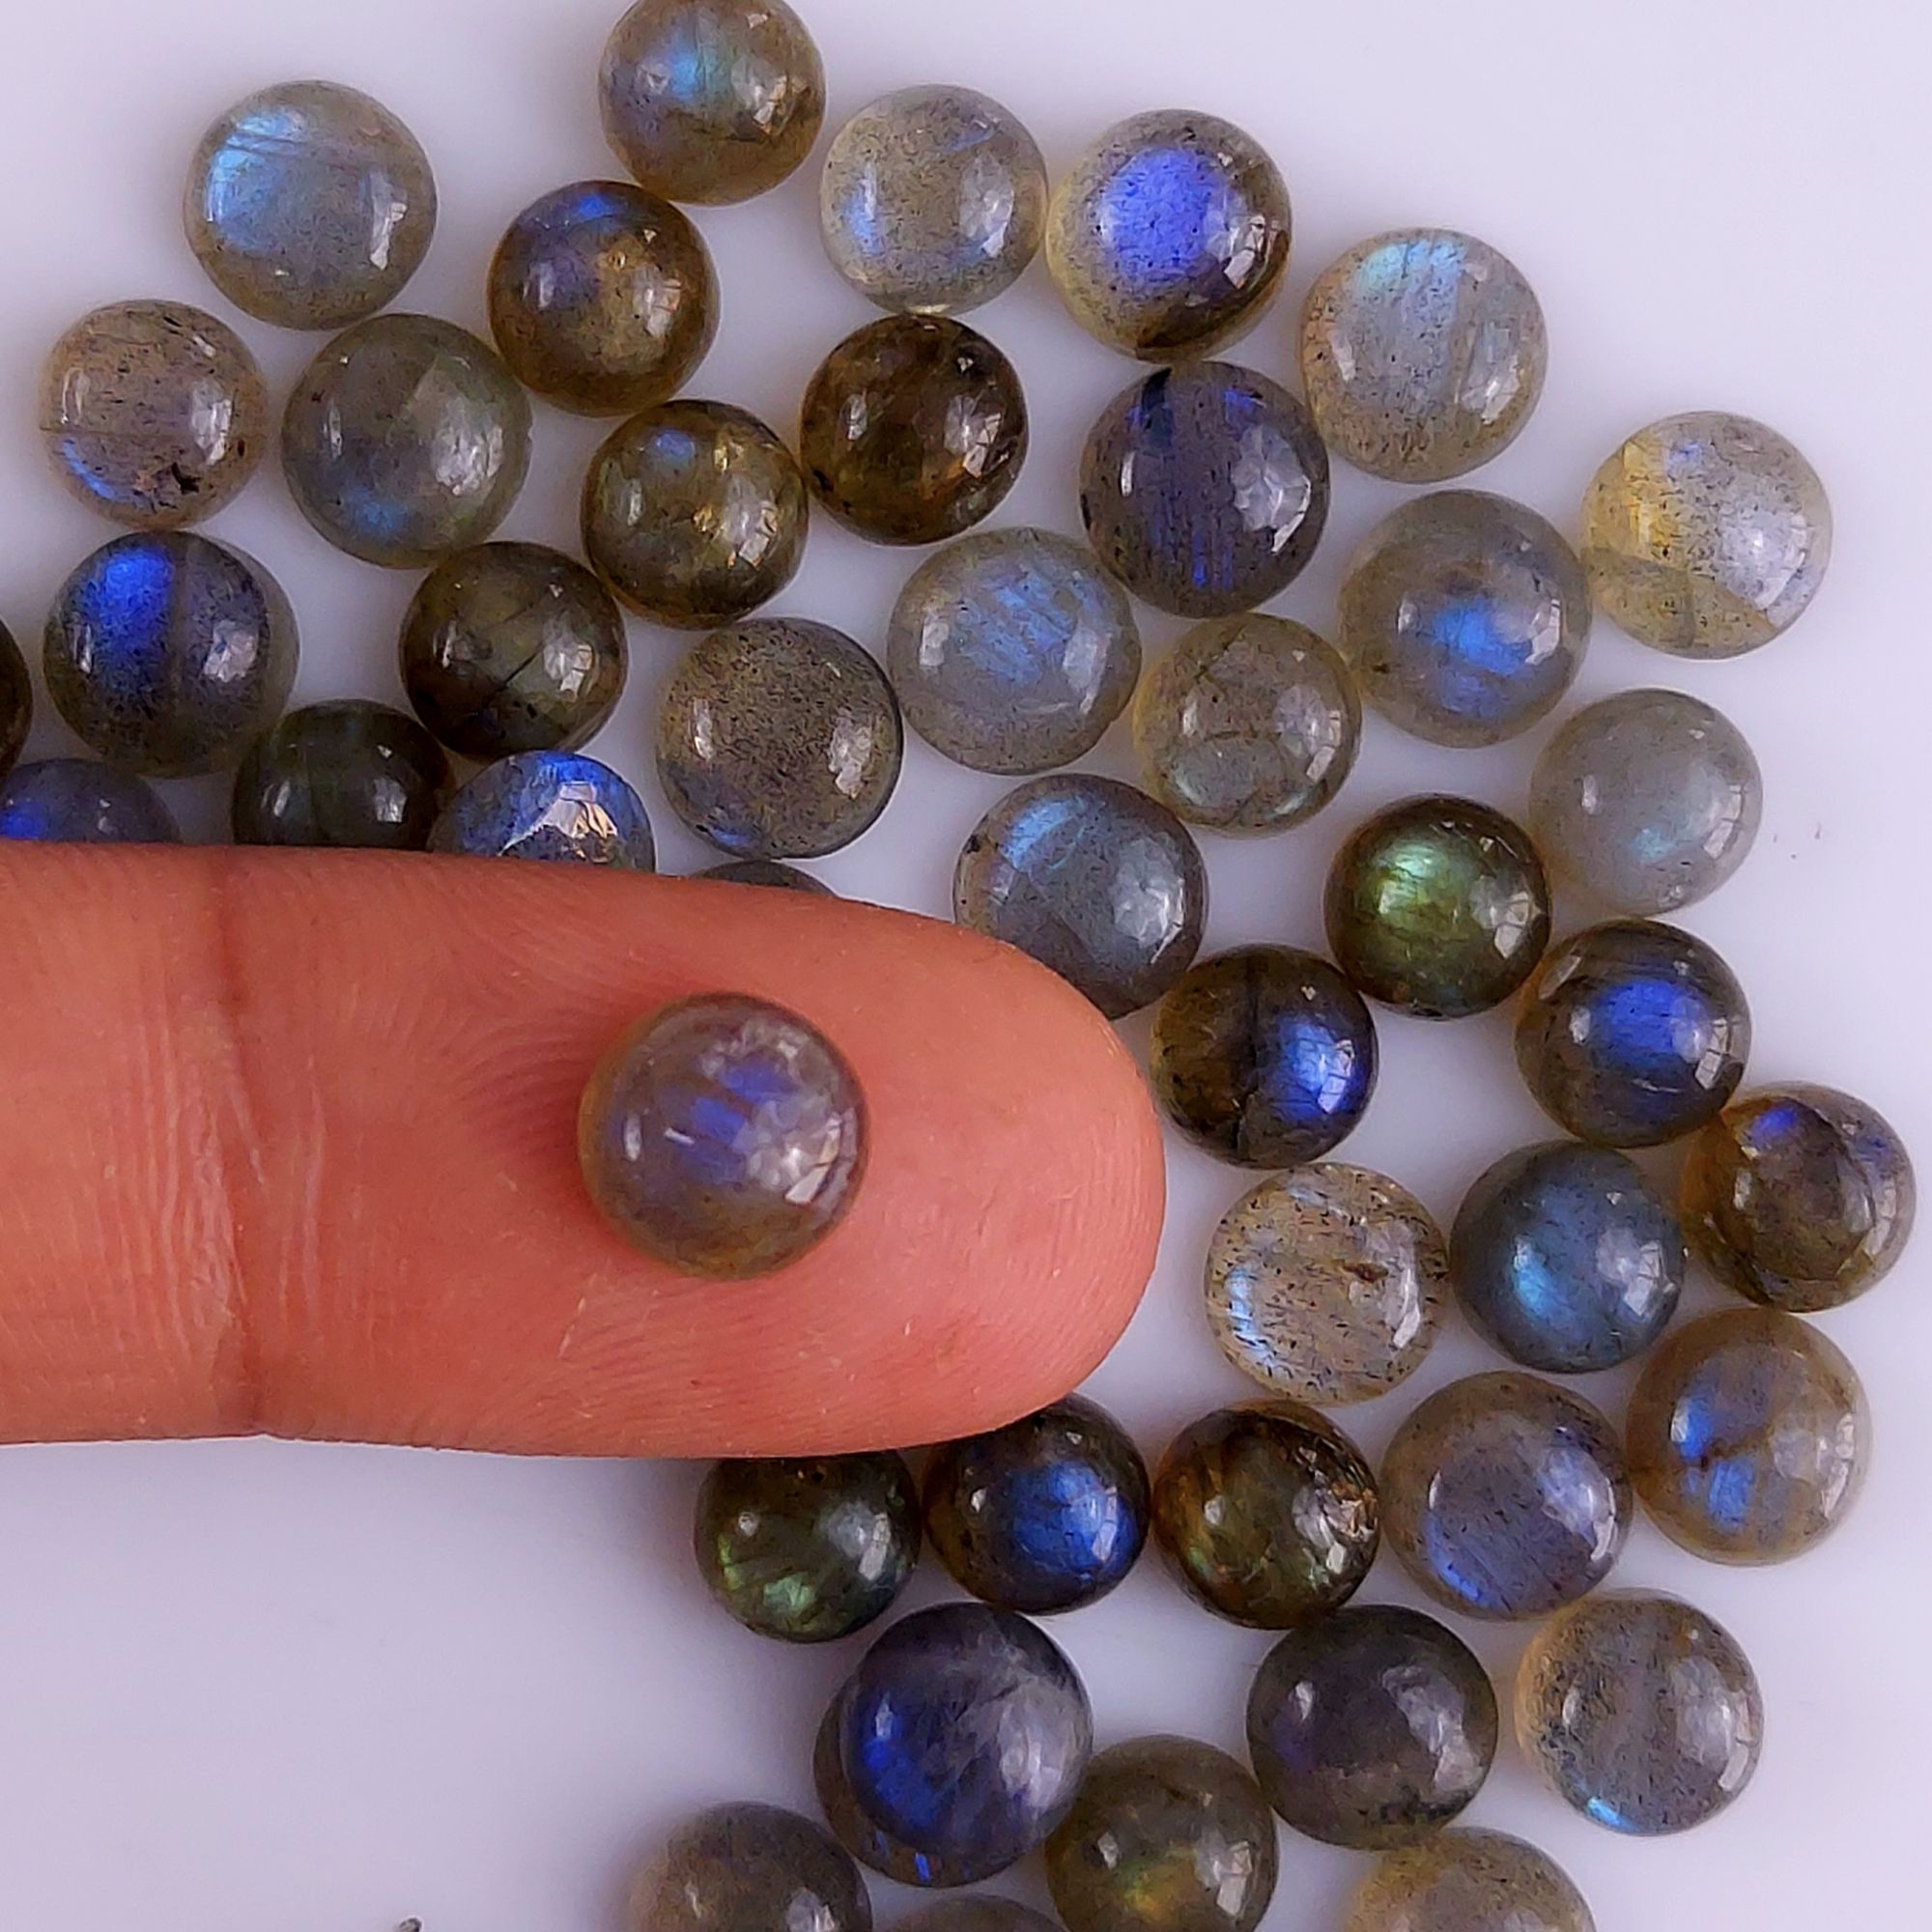 55Pcs 105Cts Natural Blue Labradorite Calibrated Cabochon Round Shape Gemstone Lot For Jewelry Making 5x5mm#734